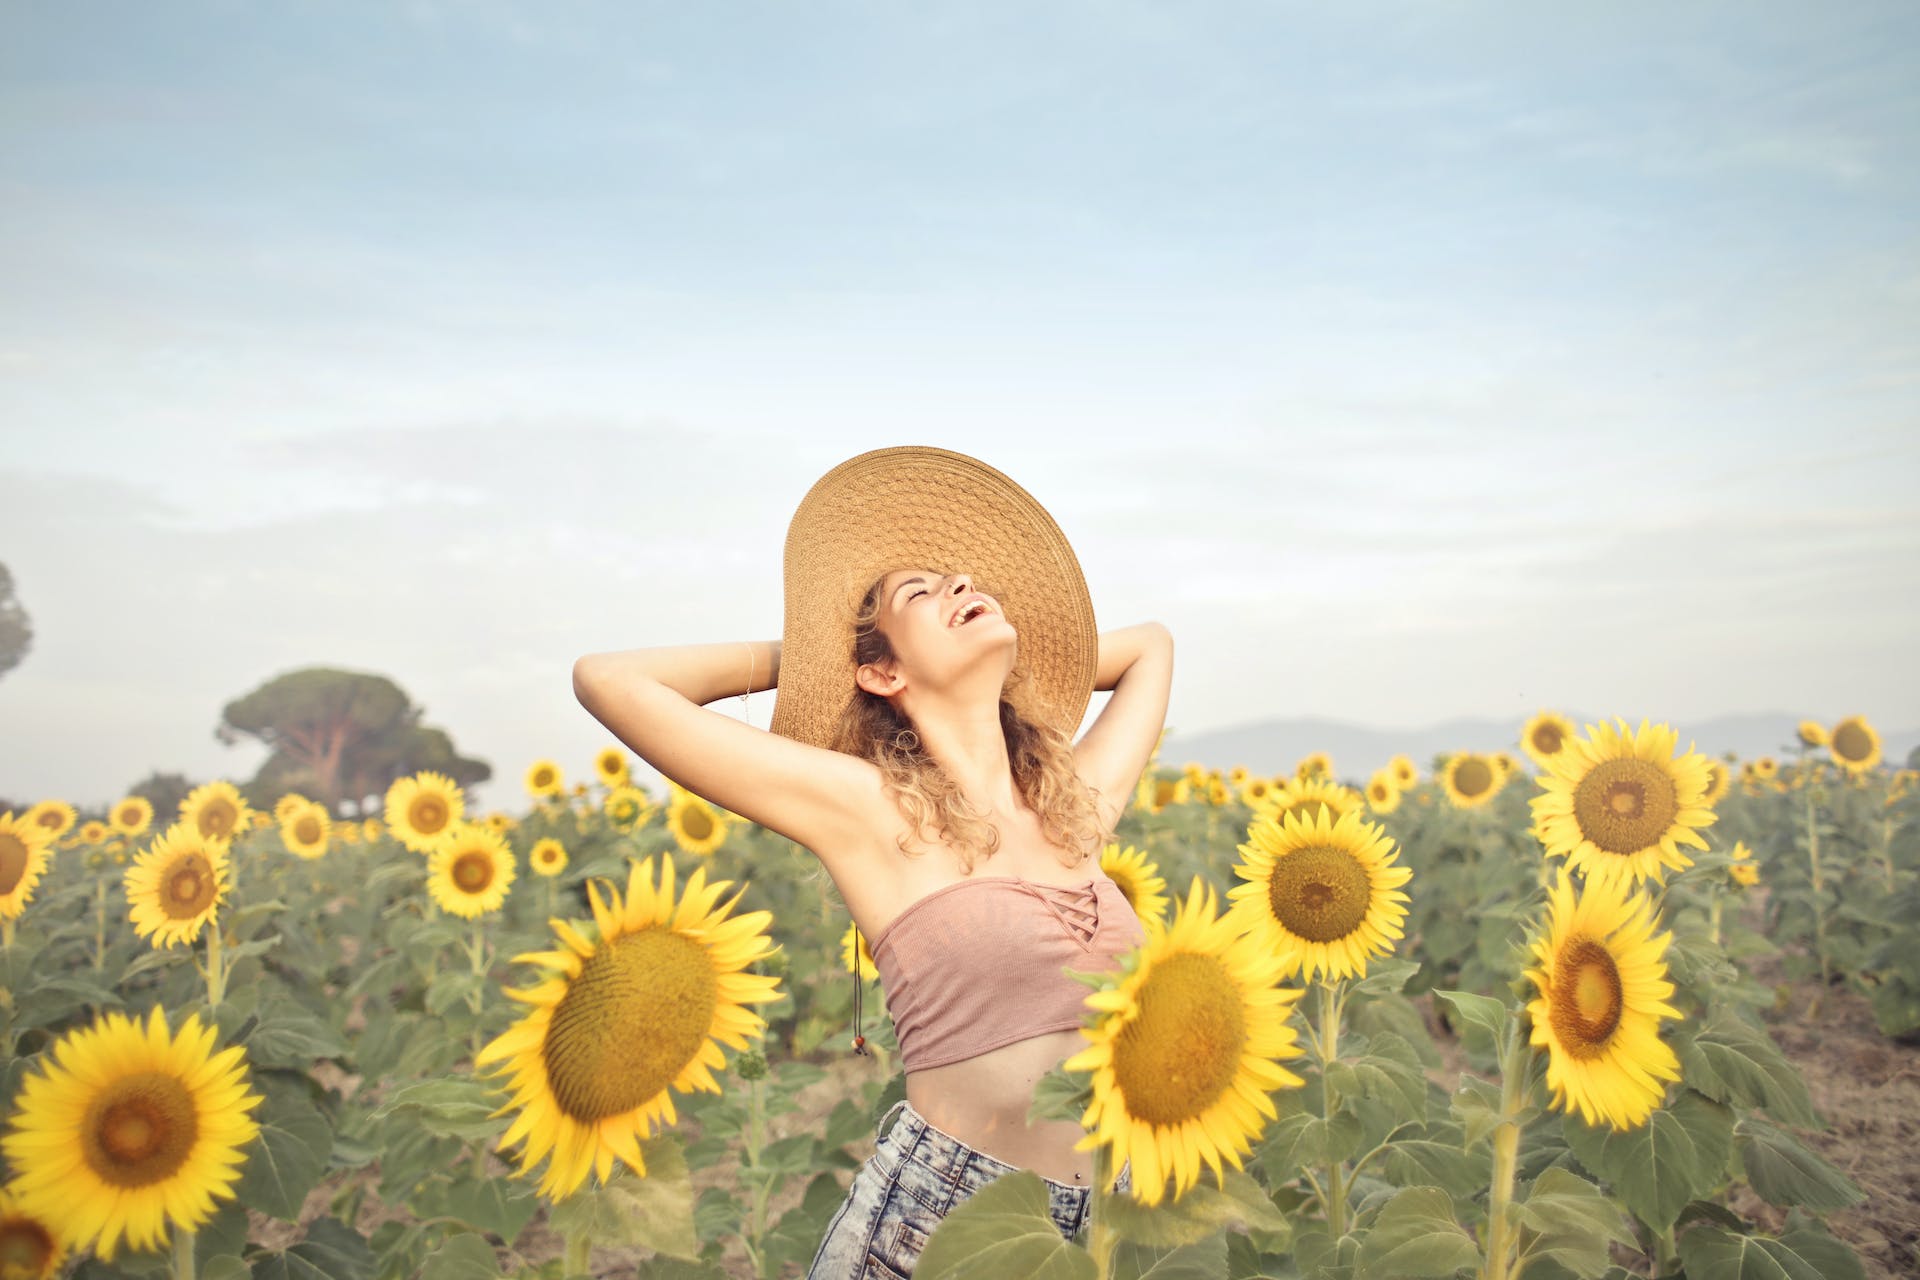 Happy woman standing in a sunflower field | Source: Pexels